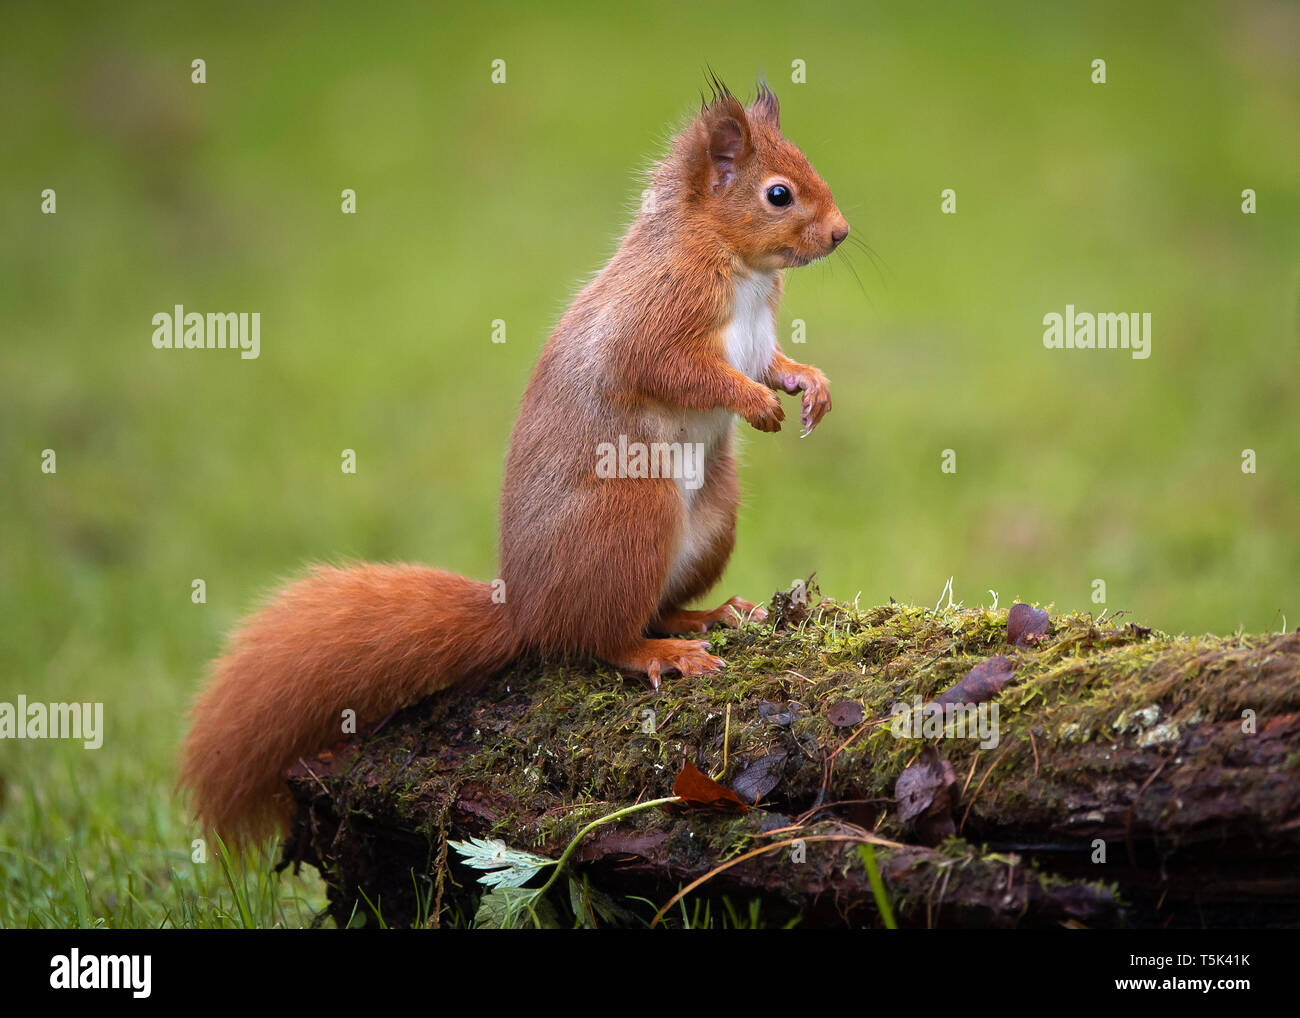 Scottish Red squirrel in winter standing on moss covered log, Dumfries Scotland Stock Photo